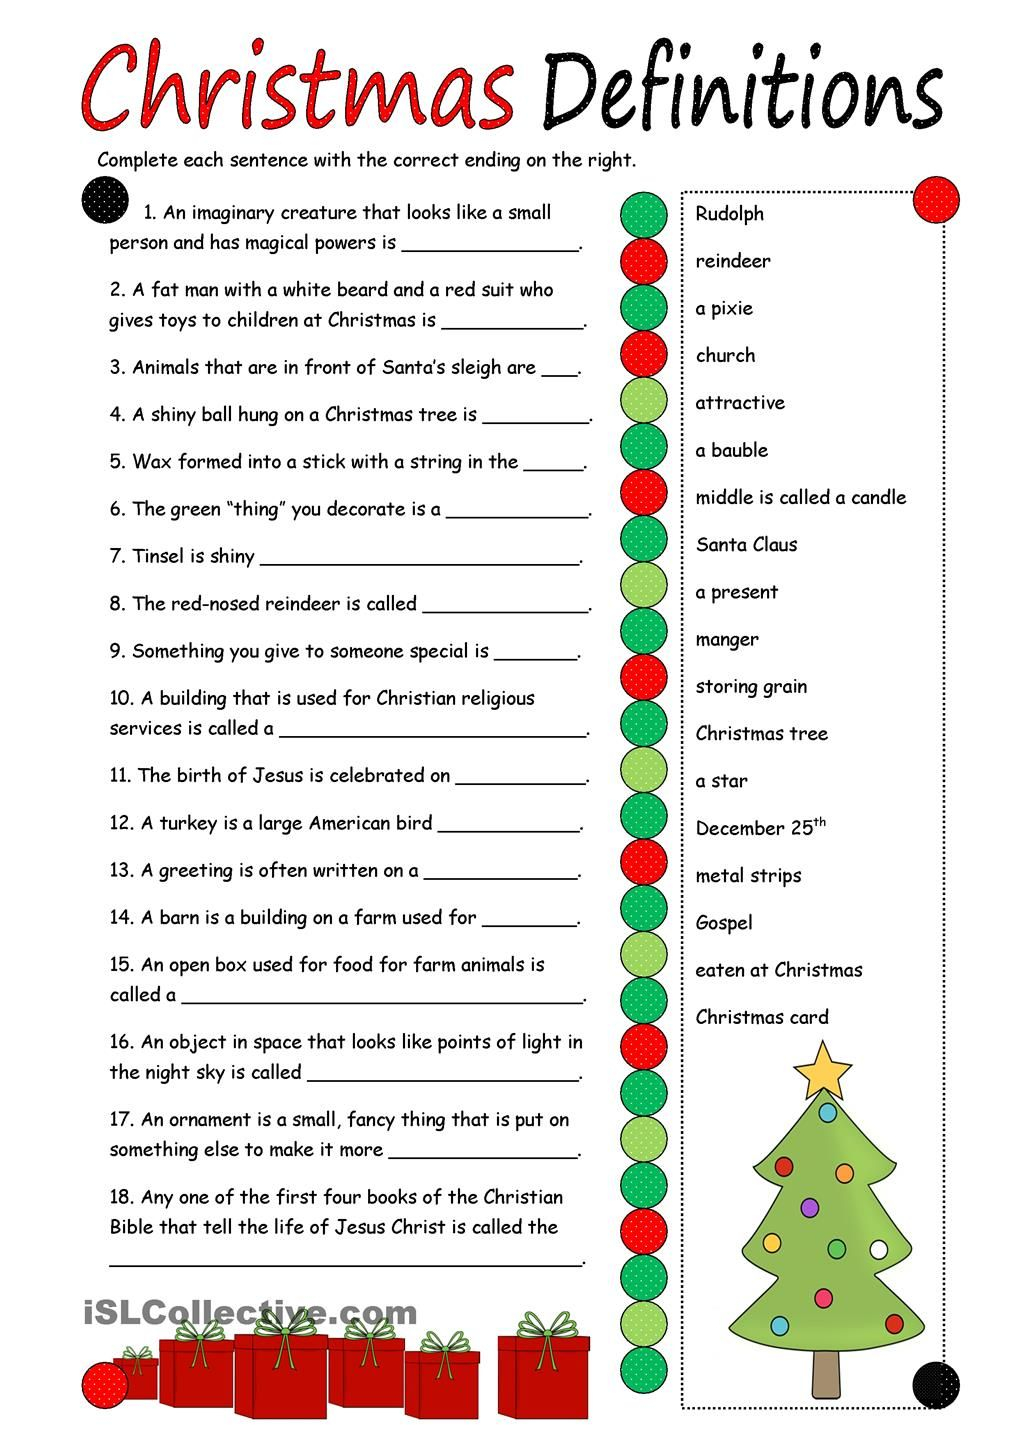 Christmas Definitions (Key Included) | Christmas Elementary